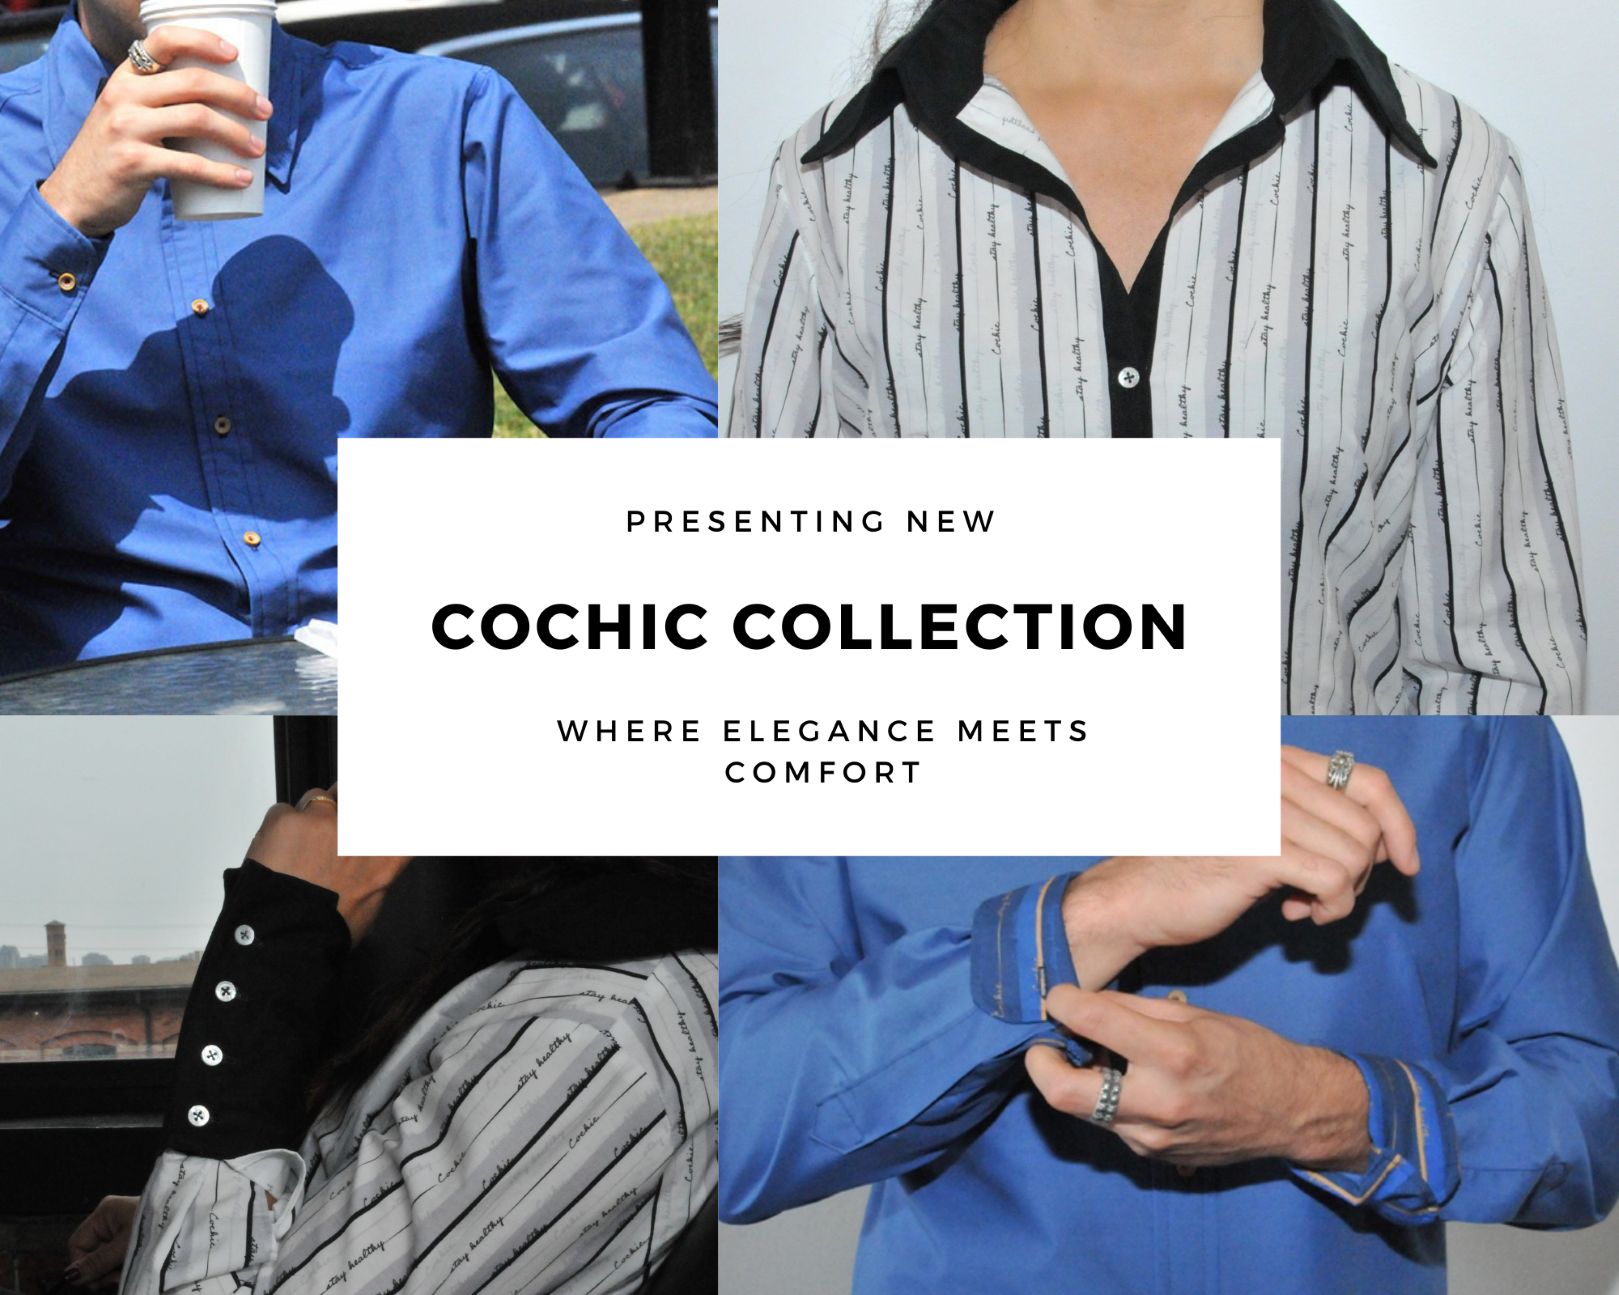 Our COCHIC Collection is Growing